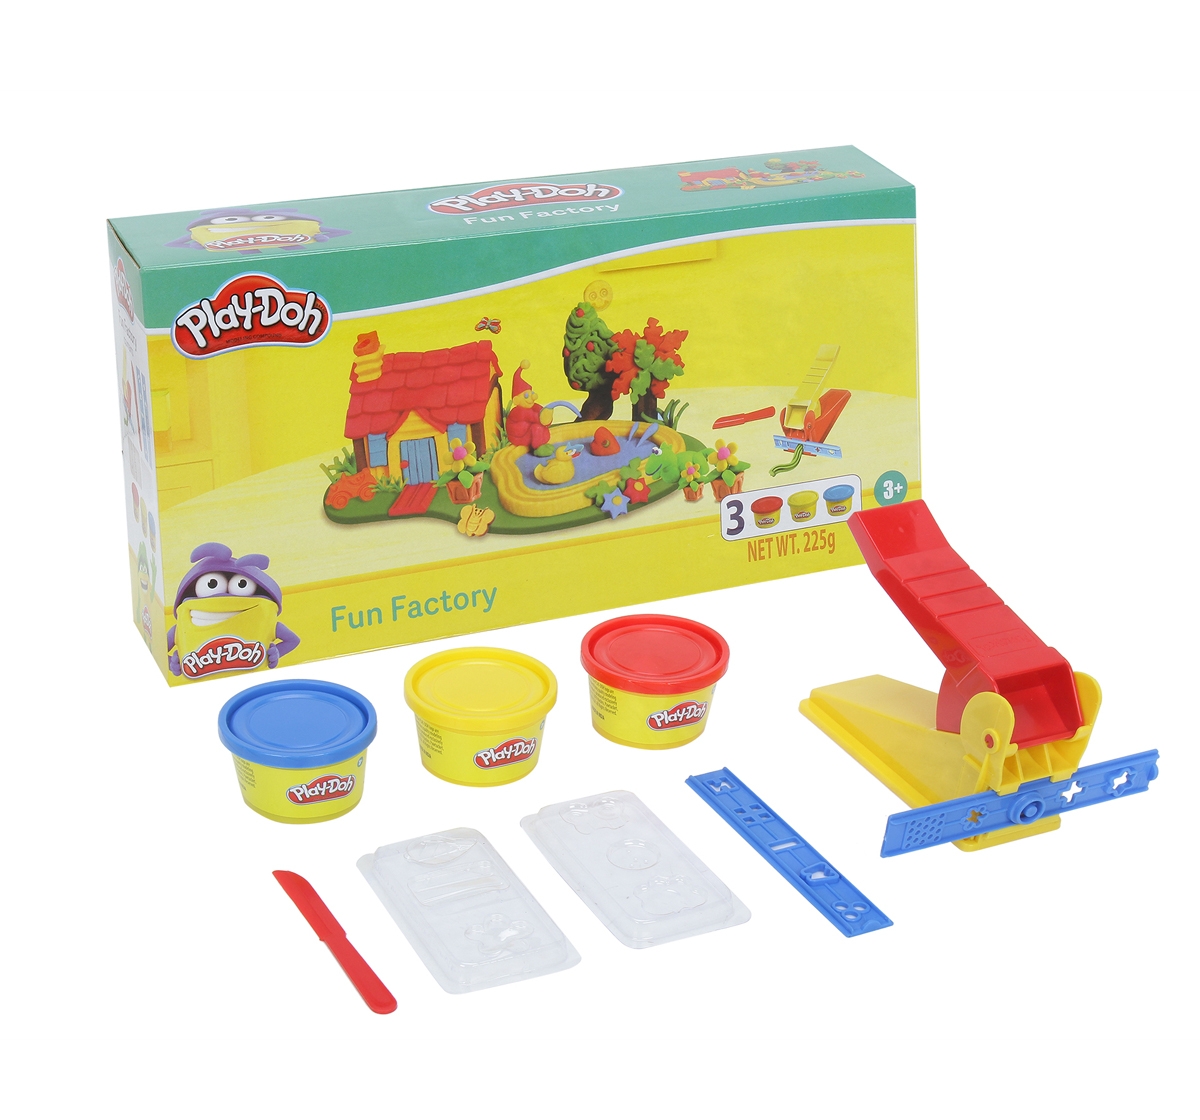 Play-Doh | Play Doh Fun Factory Toolset Arts and Crafts Toy for Kids 3Y+, Multicolour